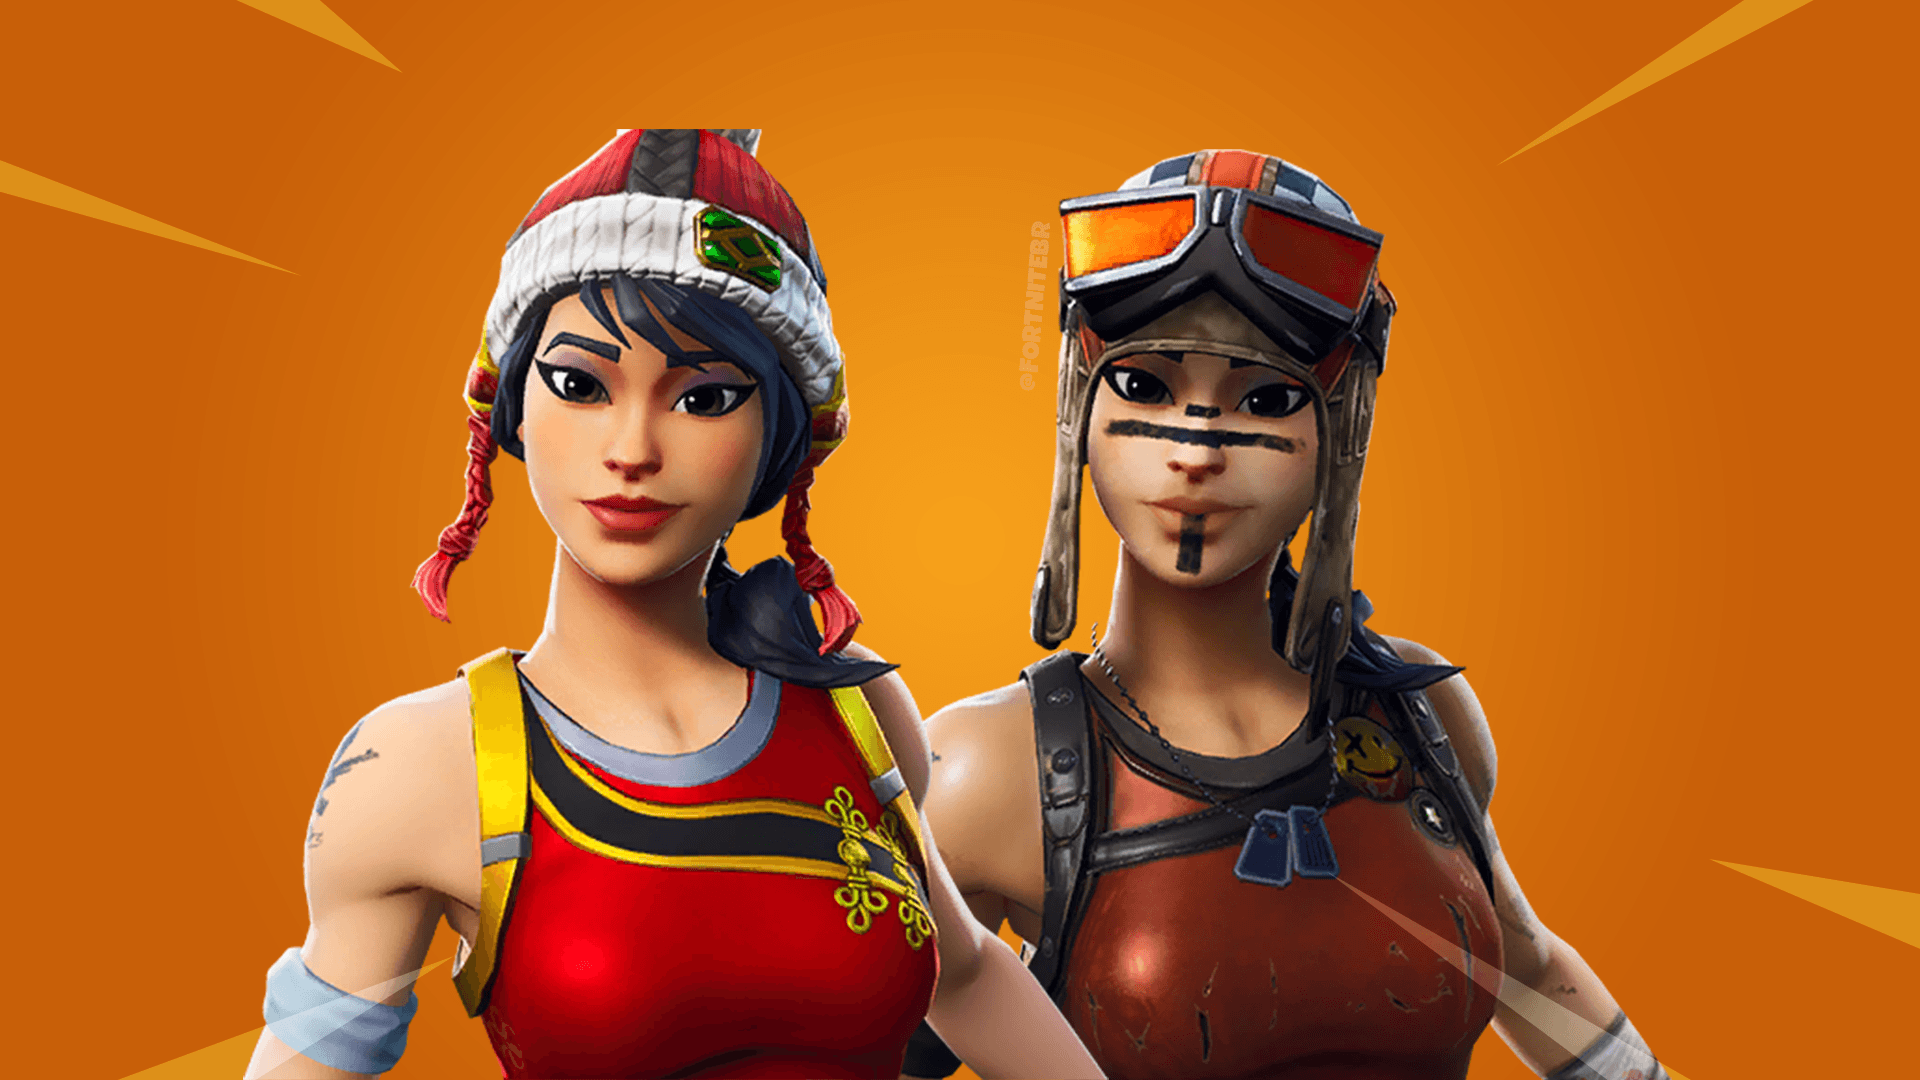 Leak: Renegade Raider, Whiteout and More Fortnite Outfits to Gain